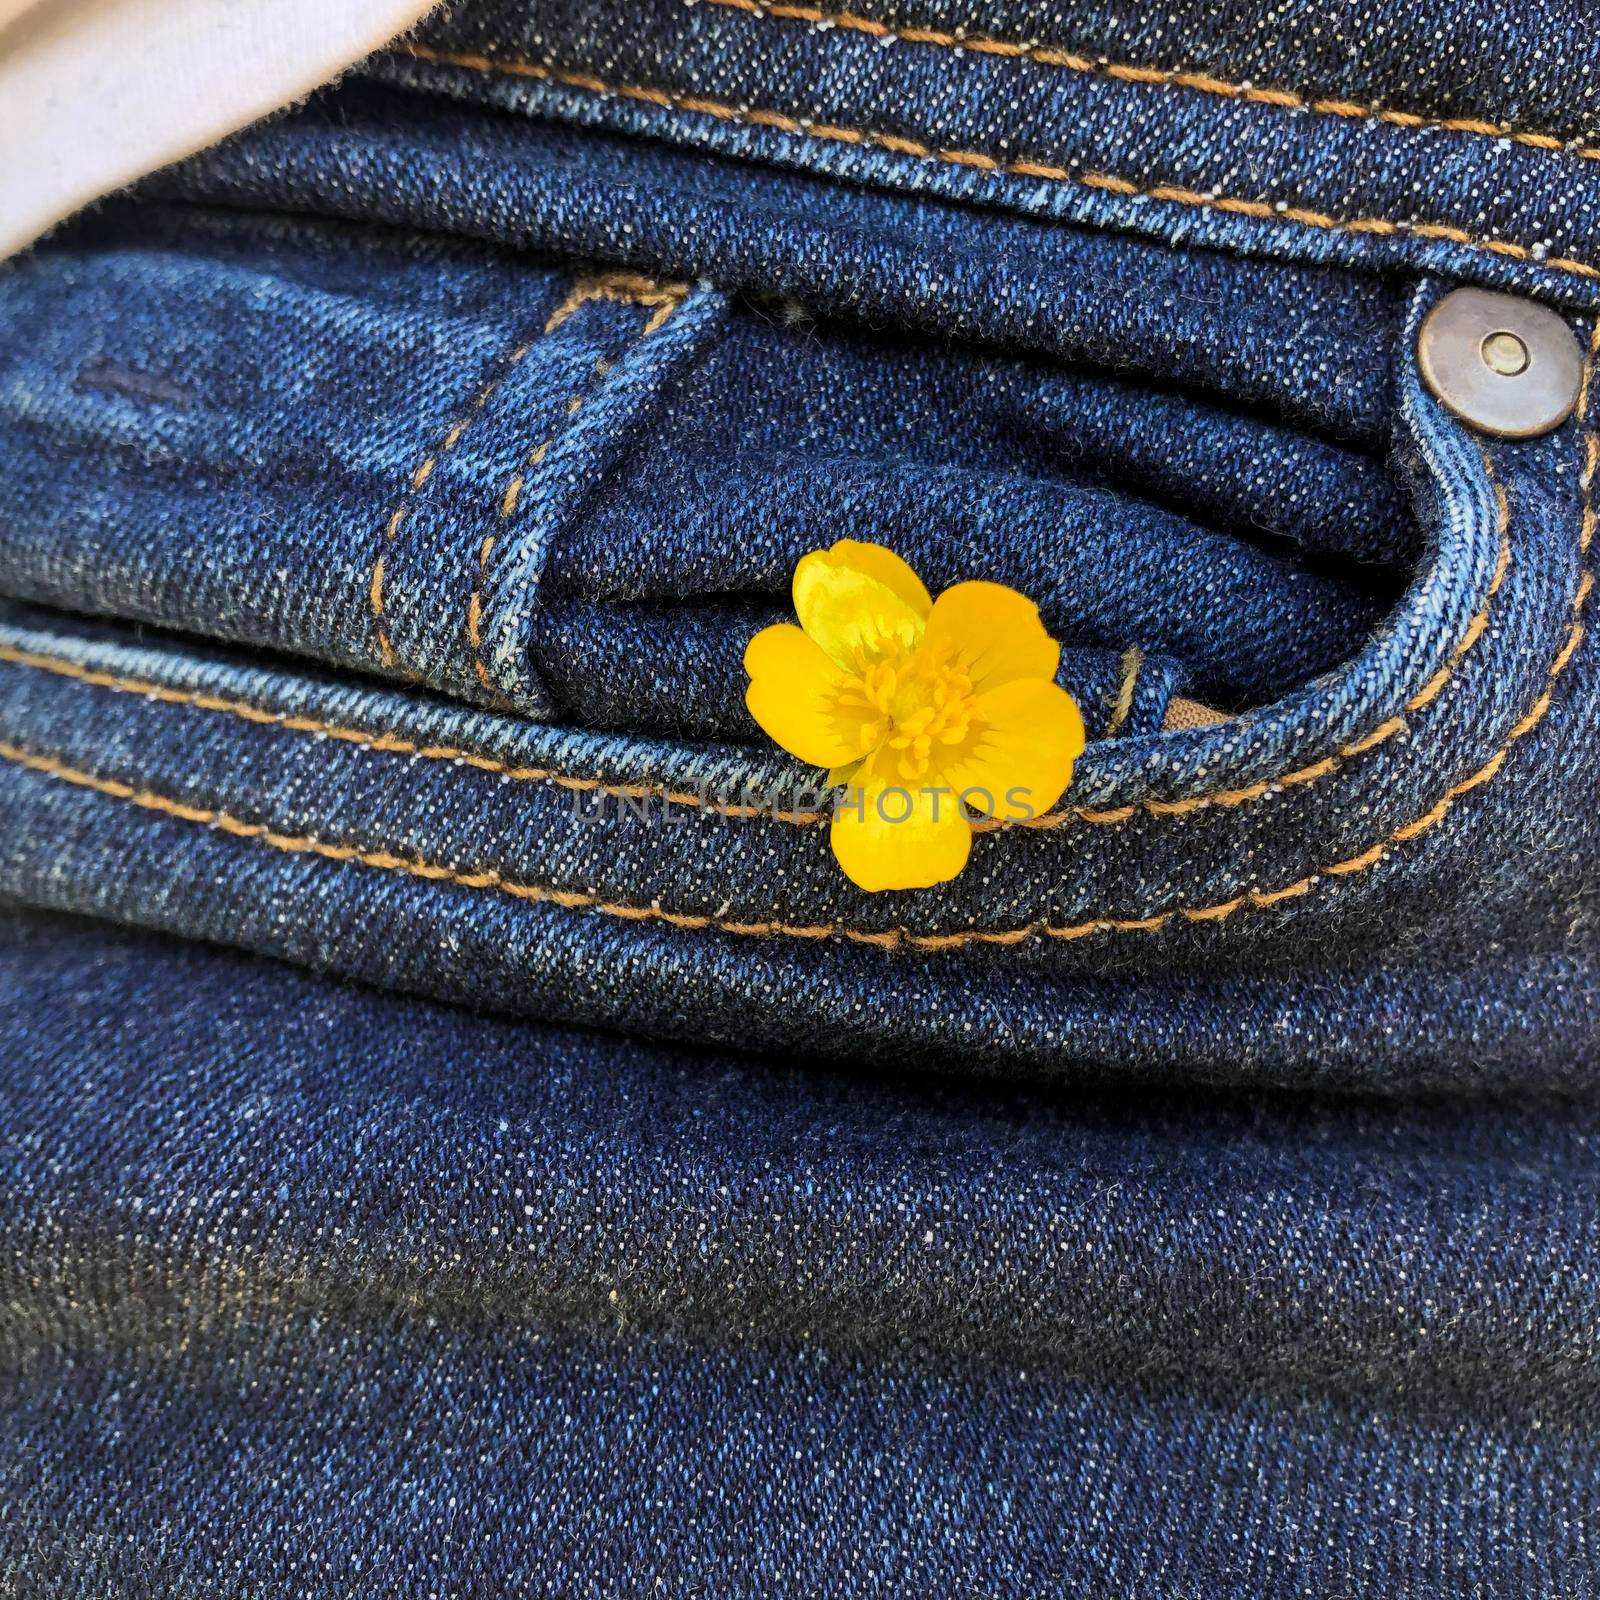 Jeans pocket close-up, in the pocket there is a yellow buttercup flower by Sonluna